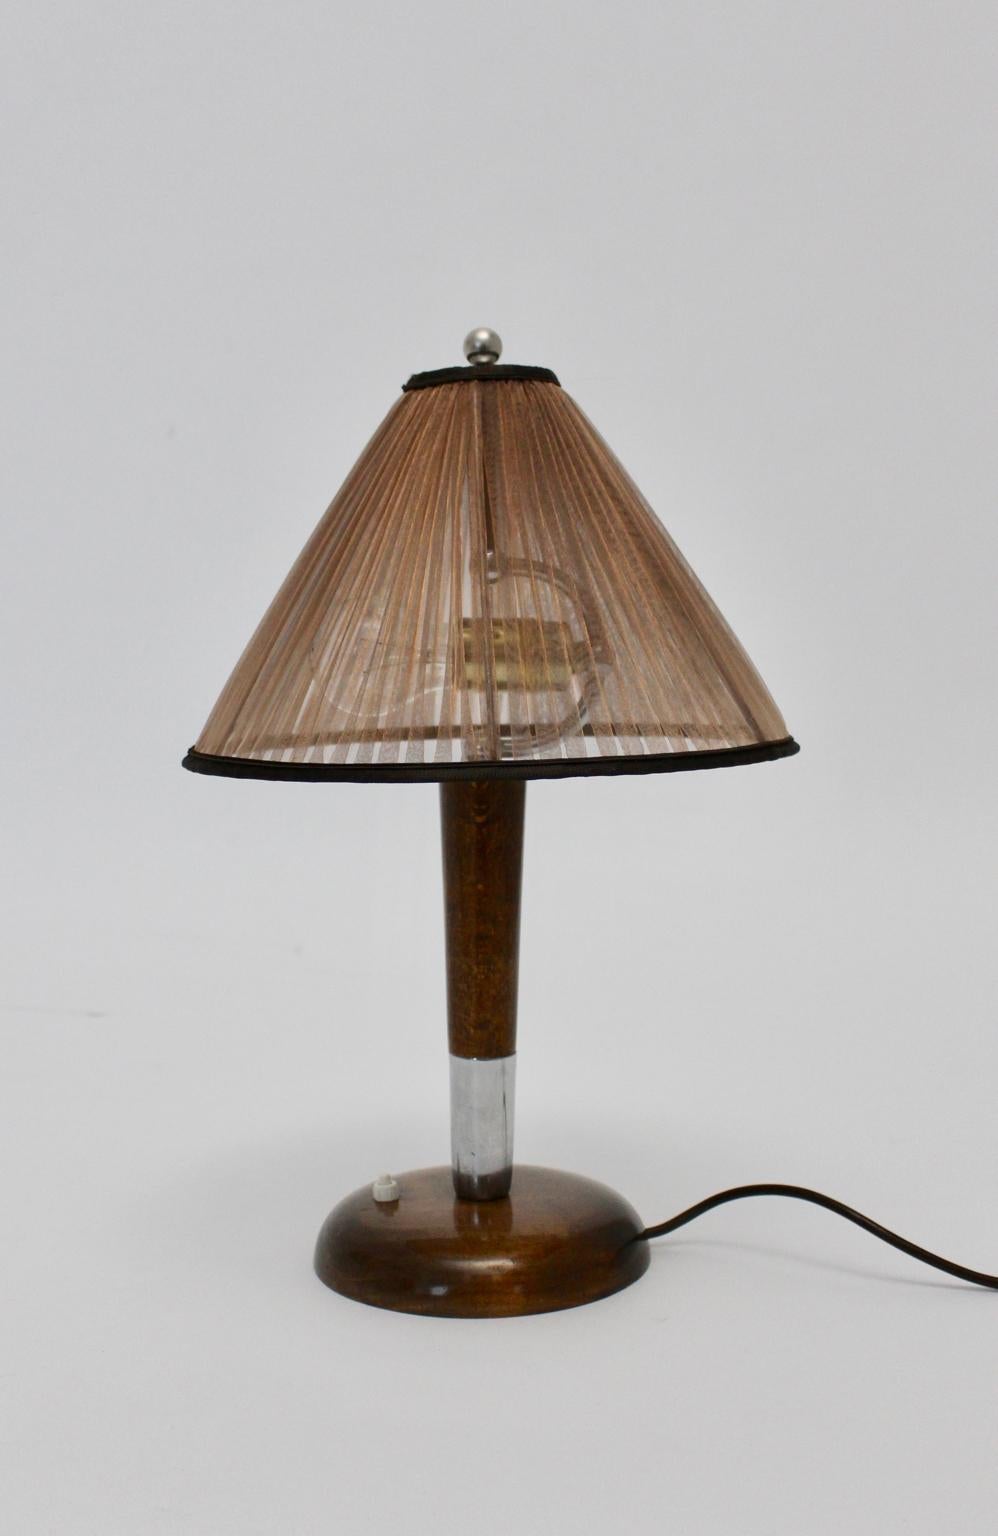 Art Deco vintage table lamp from beech and nickel 1930s Austria.
This presented table lamp was designed and made circa 1930.
Also the stem was made of solid beechwood, brown stained and lacquered and nickel-plated.
The renewed pleated lamp shade was